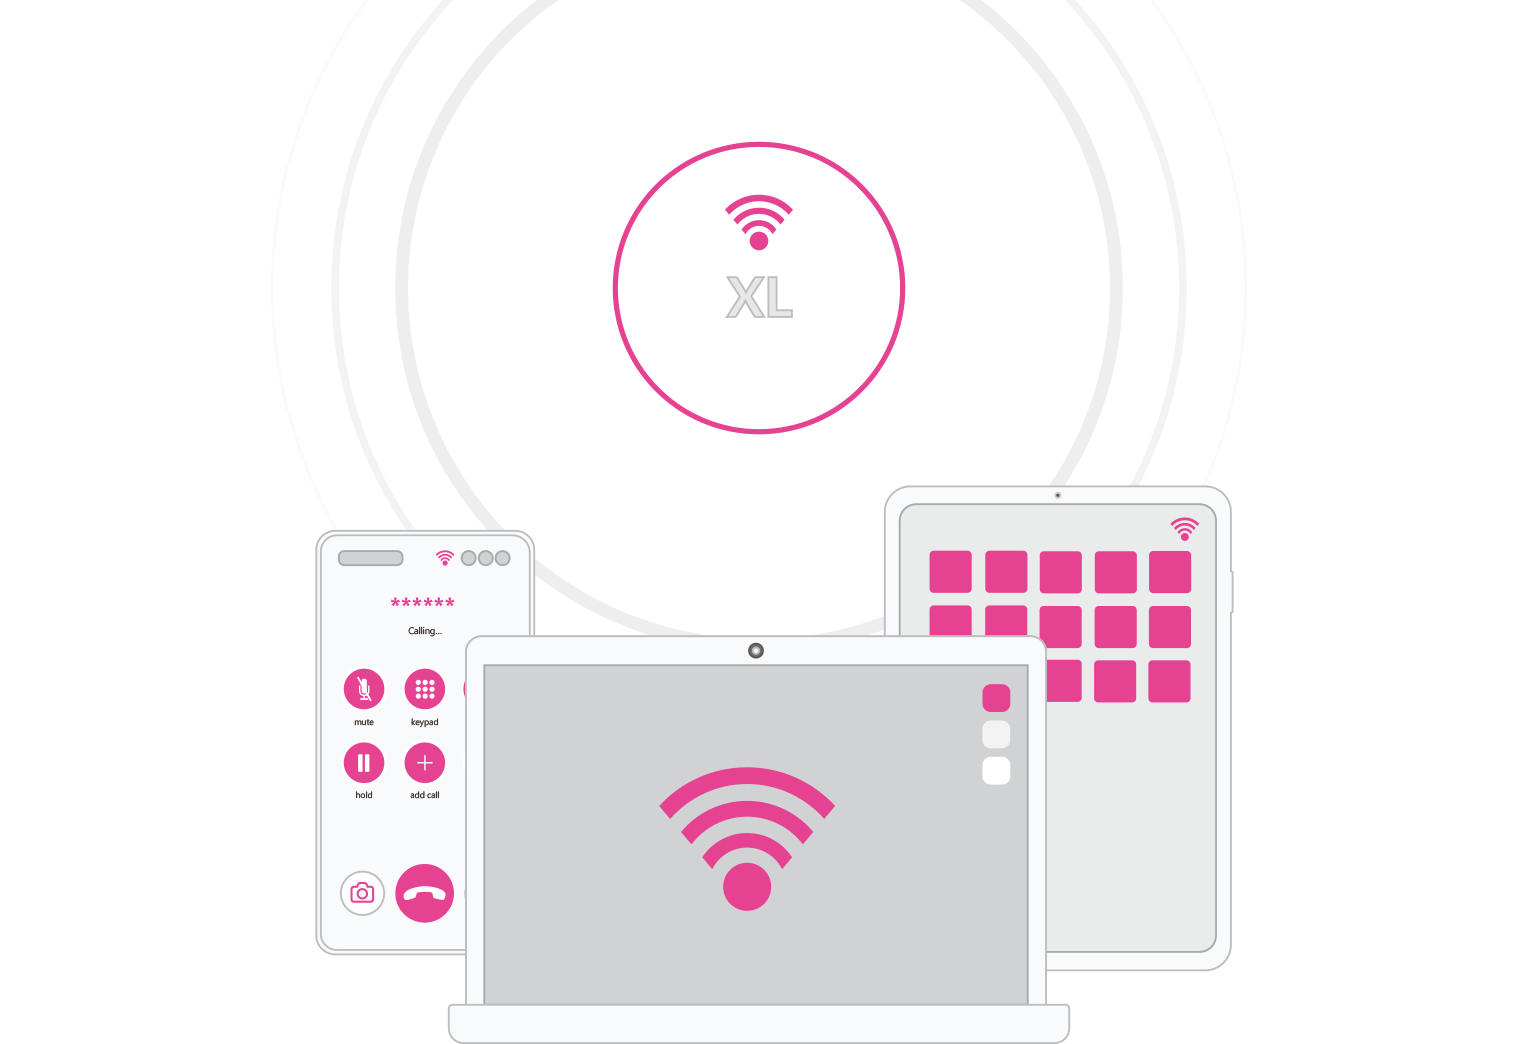 Why NetXL for WiFi Network Hardware?